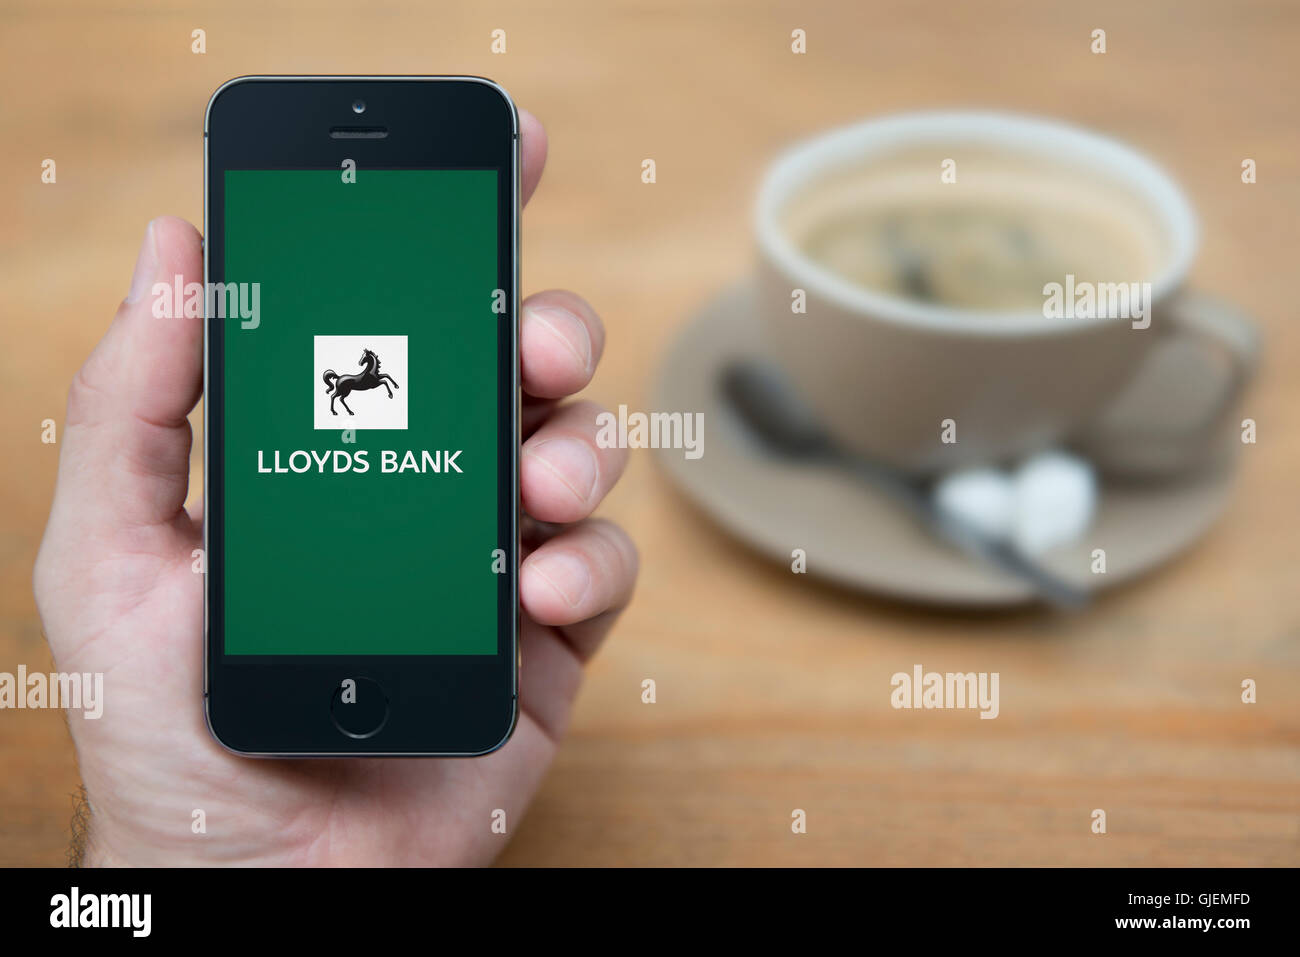 A man looks at his iPhone which displays the Lloyds bank logo, while sat with a cup of coffee (Editorial use only). Stock Photo